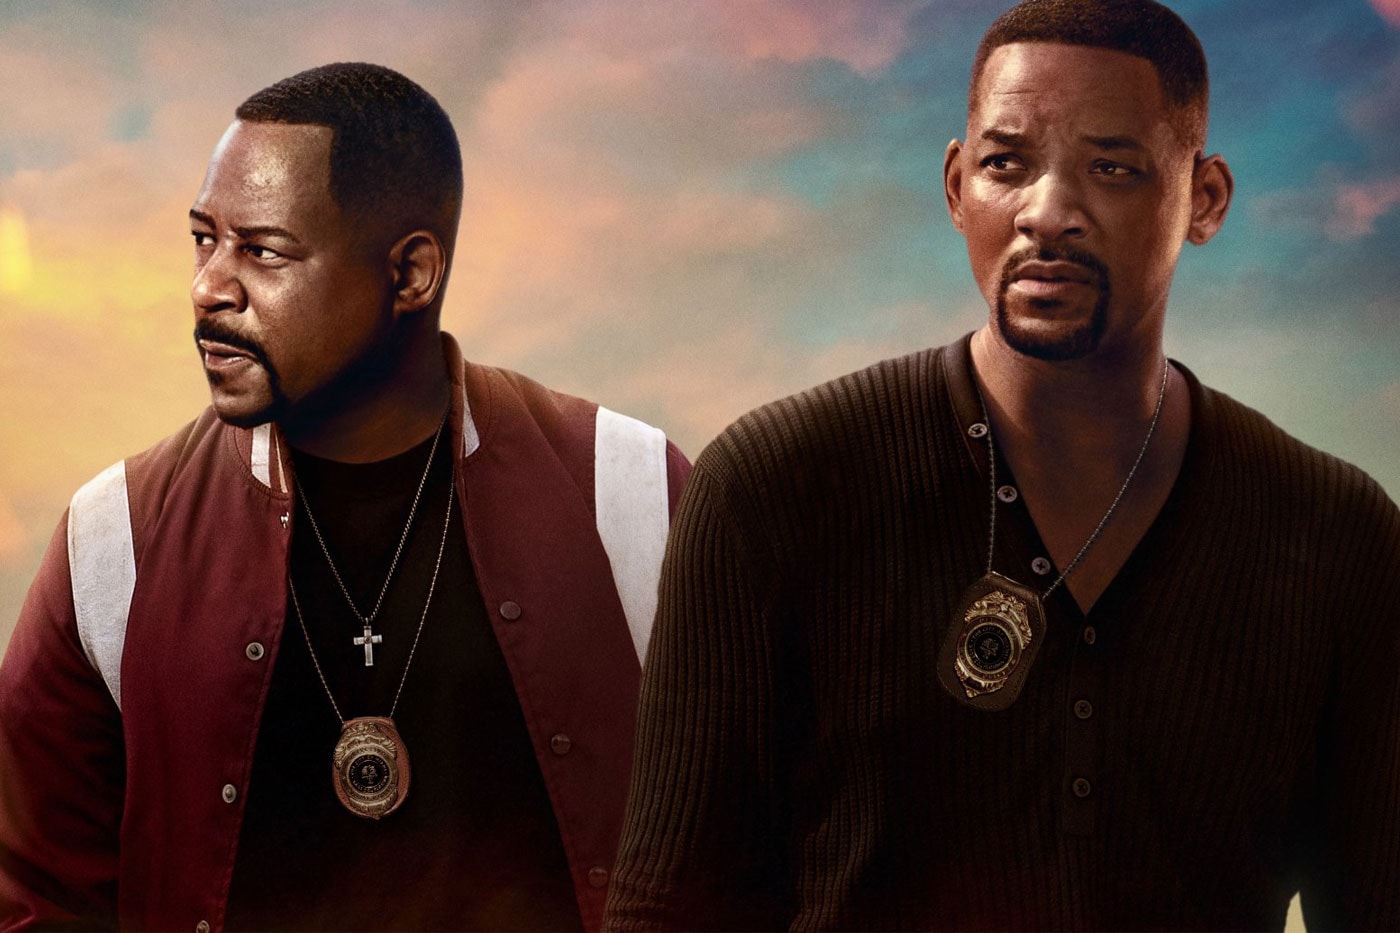 Martin Lawrence One More Bad Boys 4 Movie dismiss cancellation rumors will smith ebony interview info news